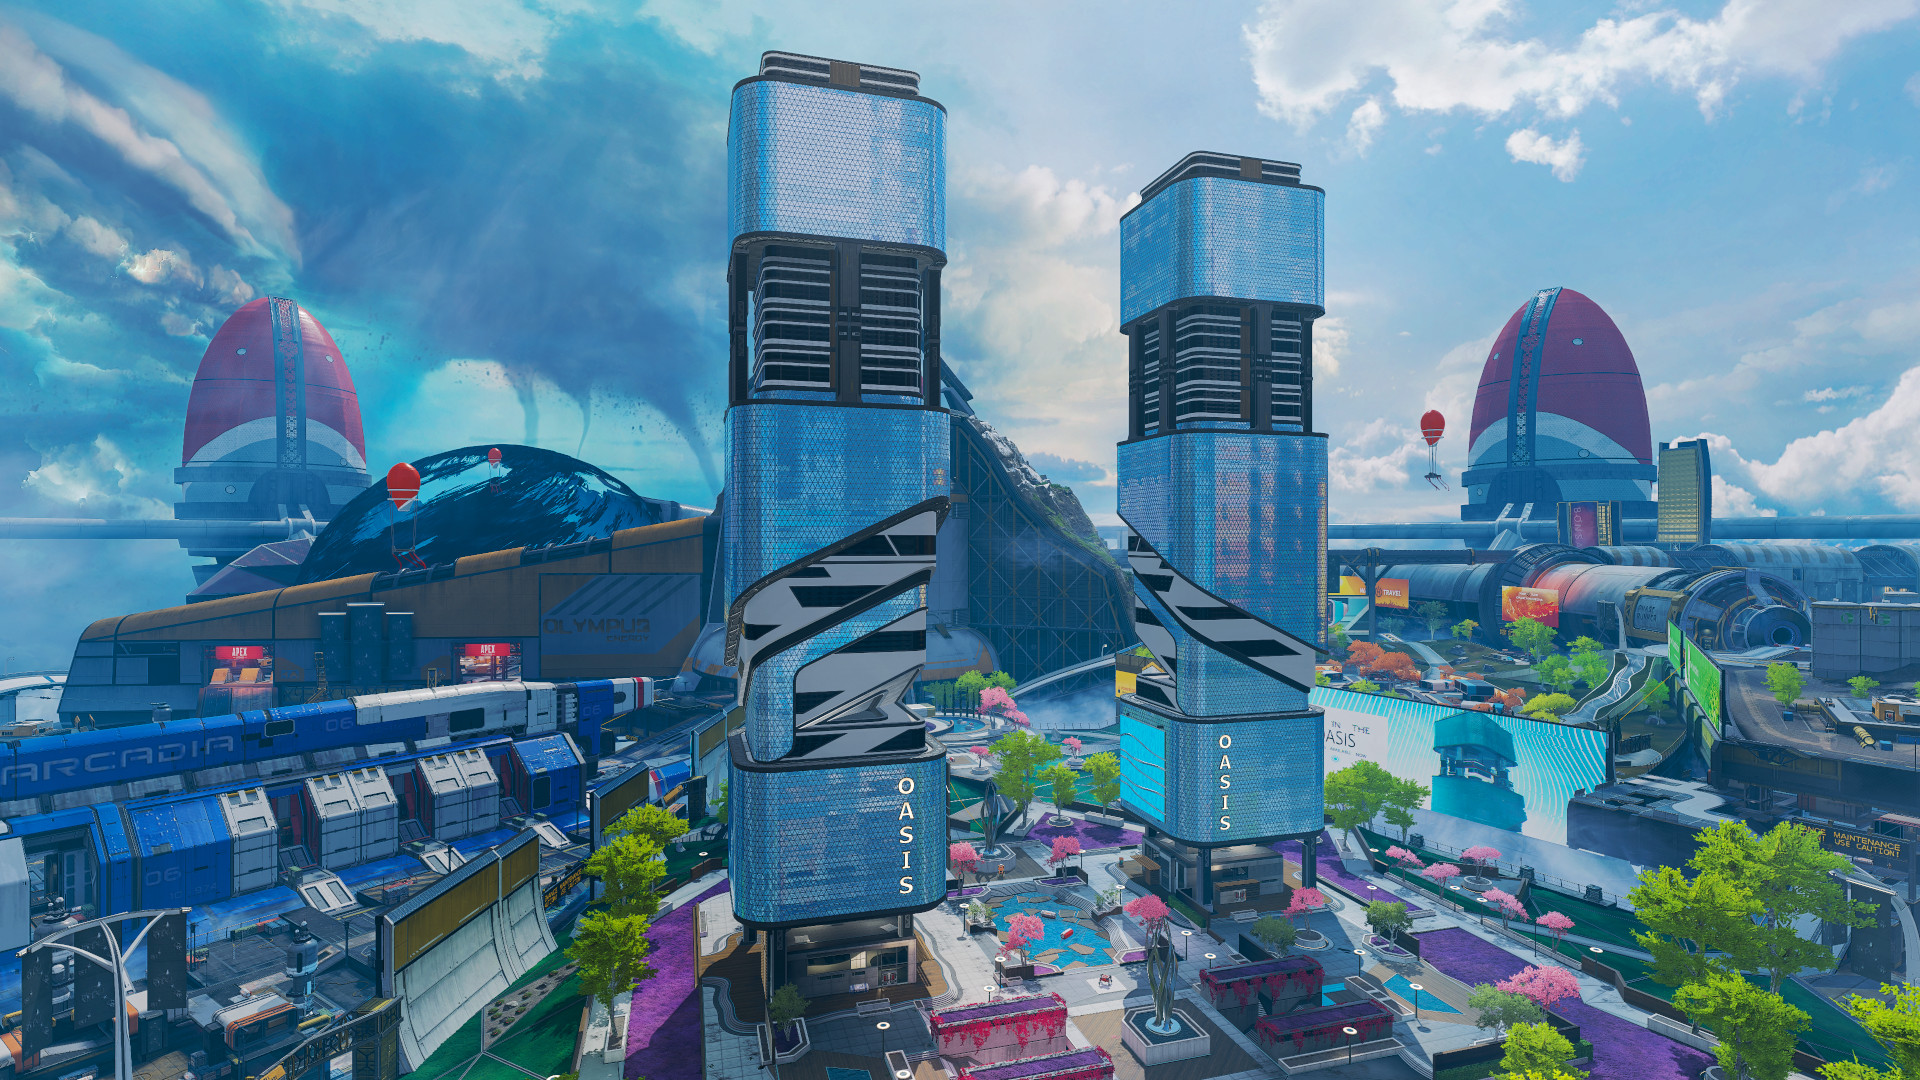 Apex Legends Season 7: A wide-angle view of the Olympus map, showing two large buildings in the Oasis area, with various other buildings and scenery in the background.